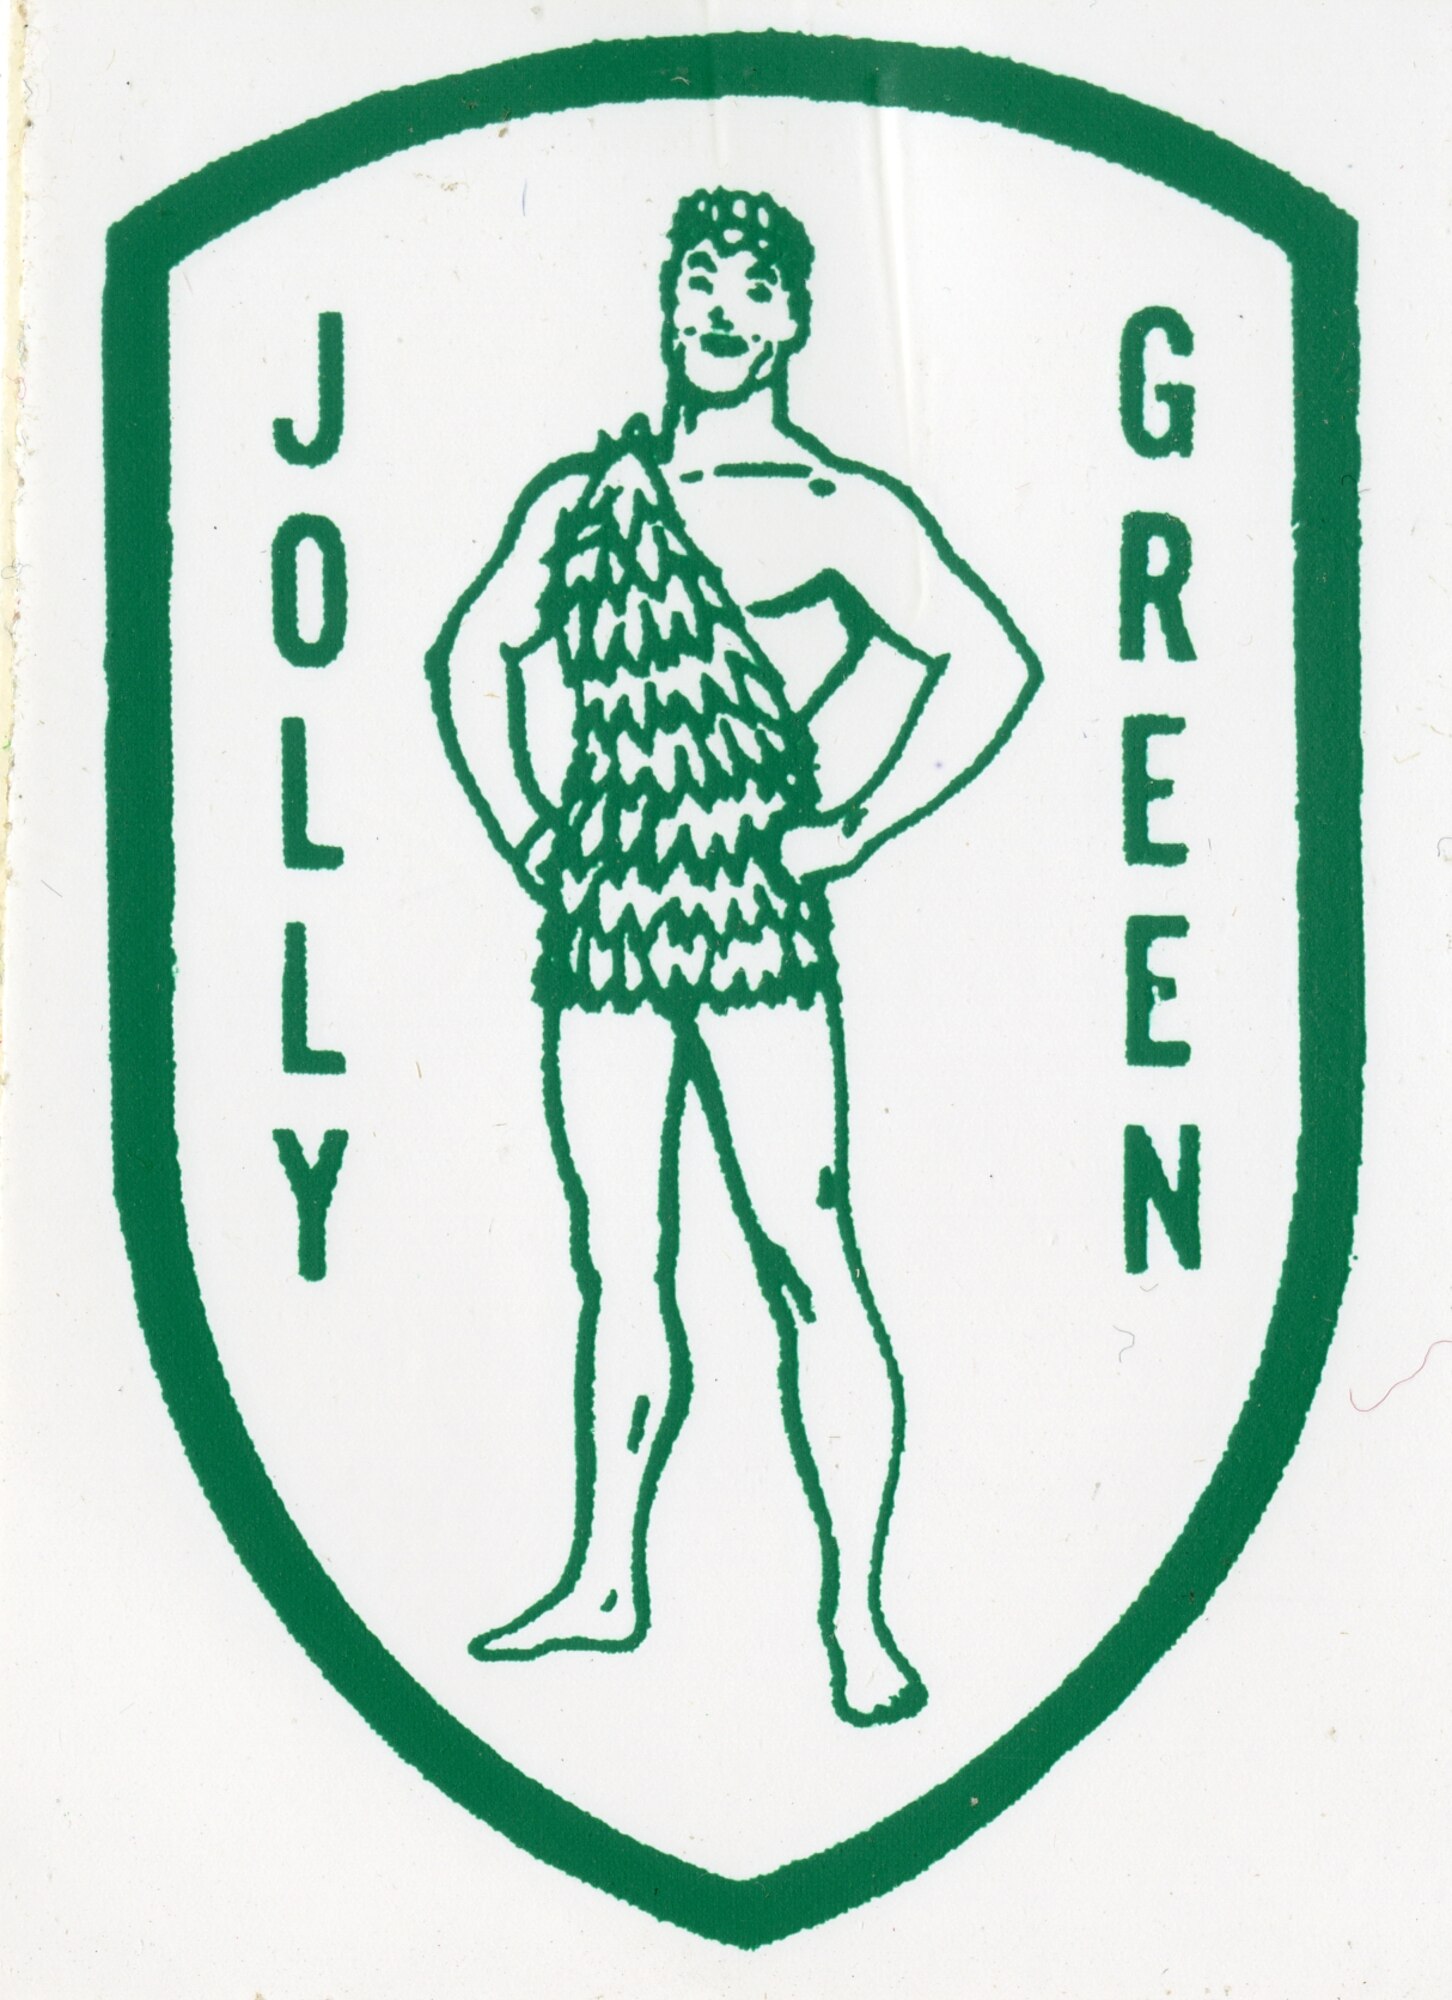 The Aerospace Rescue and Recover Service squadrons started using the Jolly Green Giant mascot as part of their HH-3 and HH-53 units during the conflict in Southeast Asia.